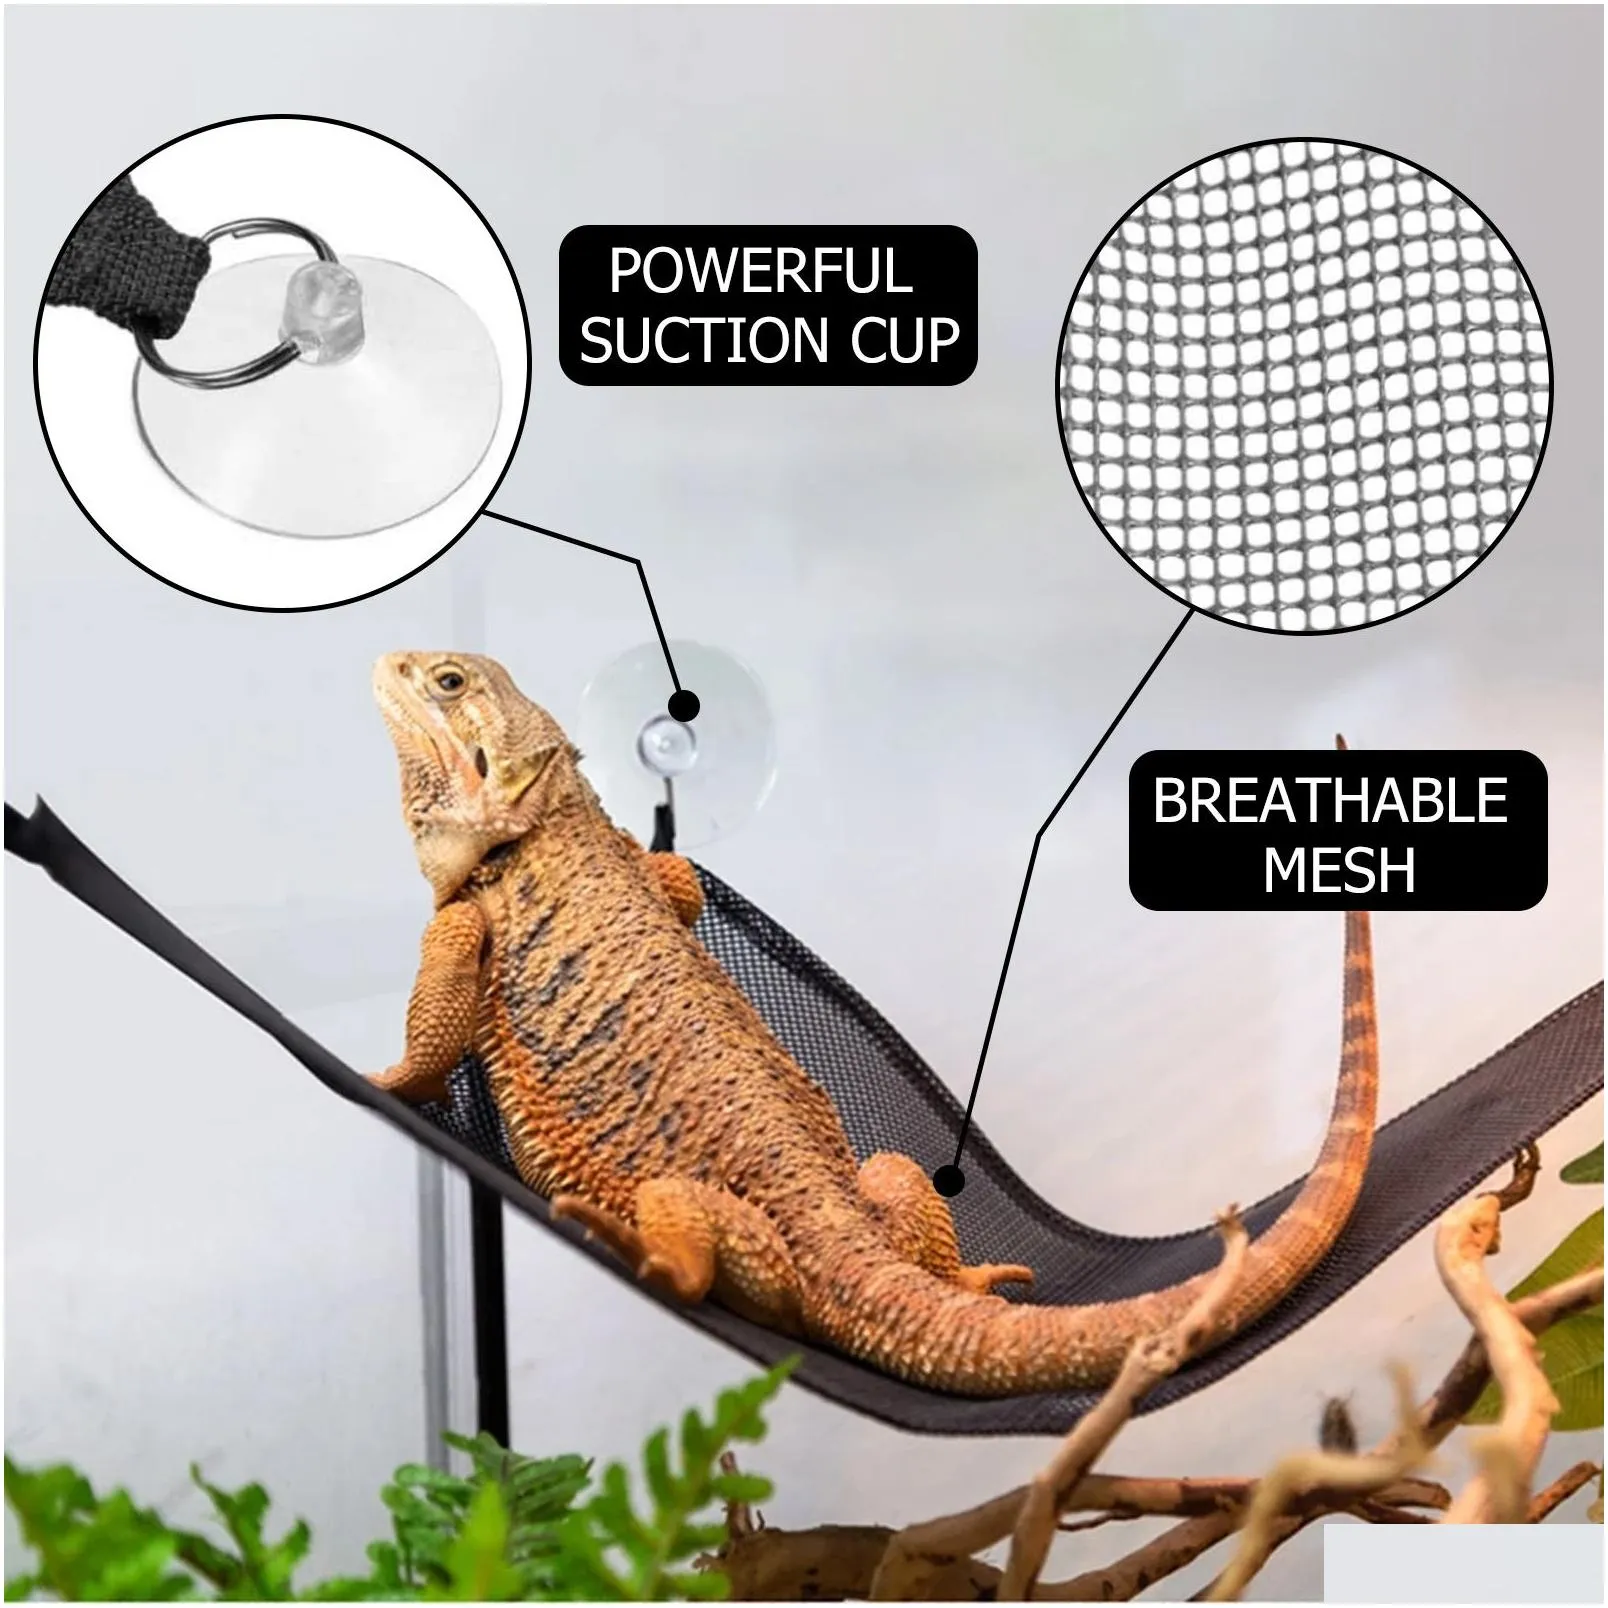 Reptile Supplies Freight Yegbong Oem  Reptile Supplies Hammock Recliner With Suction Cup For Lizard Gecko To Climb Triangle Net Hom Dhlnz